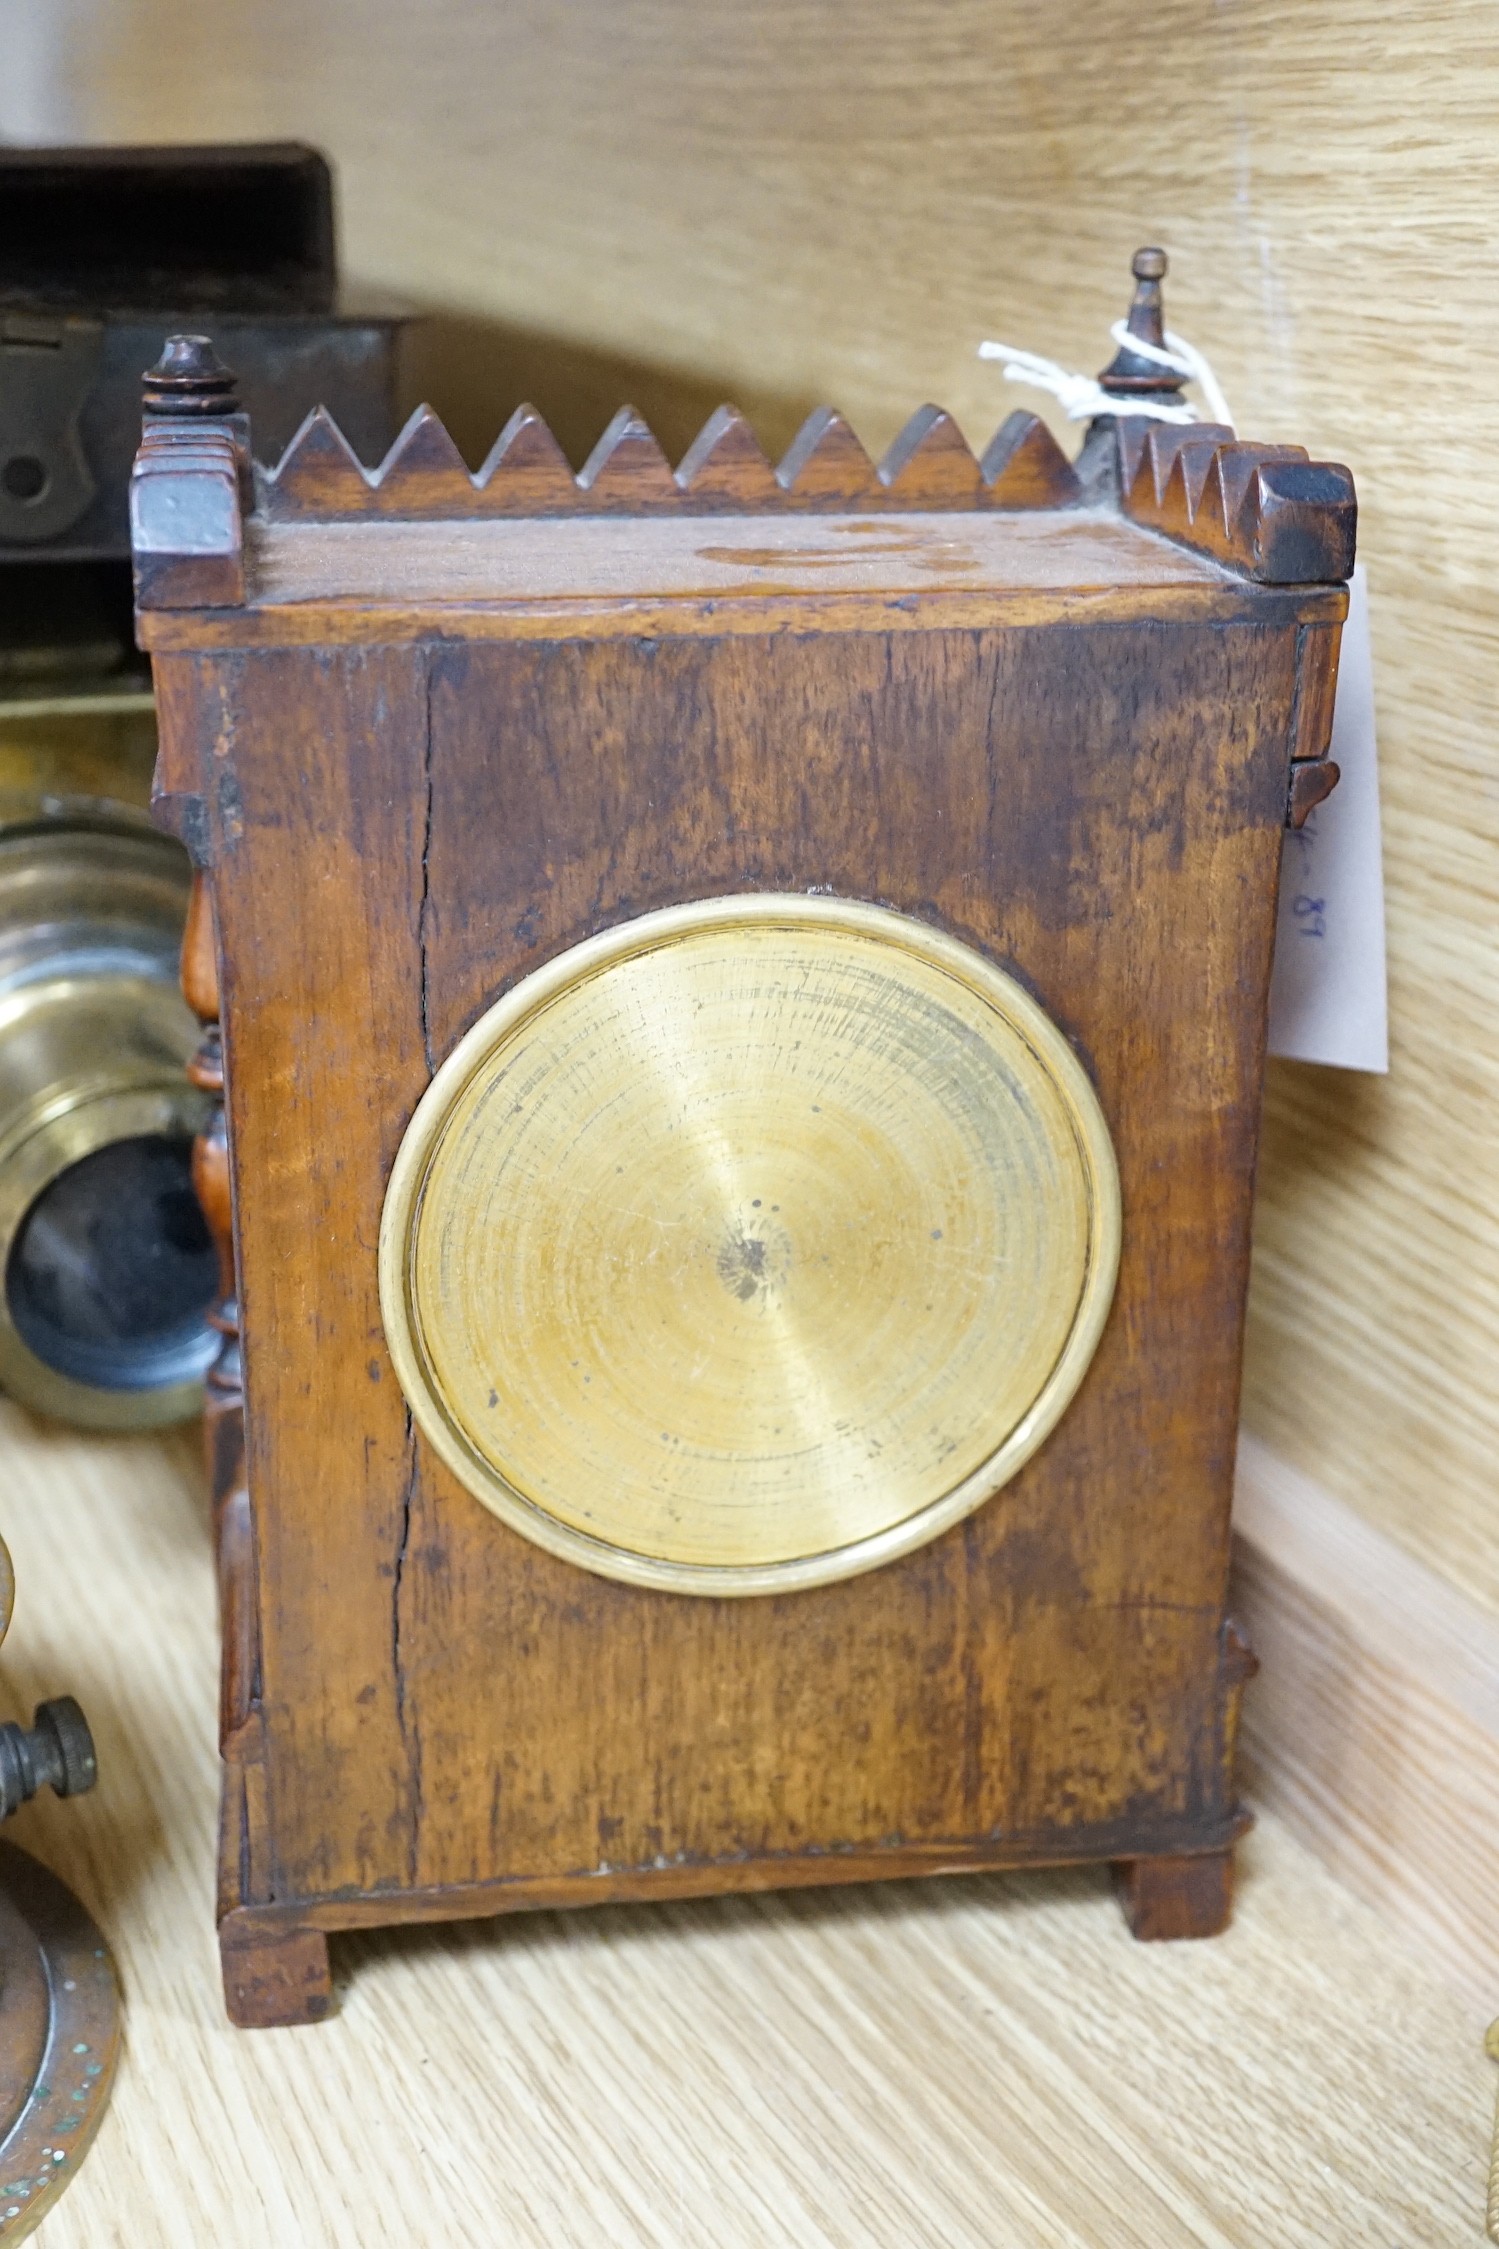 A cased tinplate and pressed brass Magic Lantern, Case 46 cm long, A French walnut cased mantel timepiece, with key, 23cm, and a brass cased Milli-Amps scale